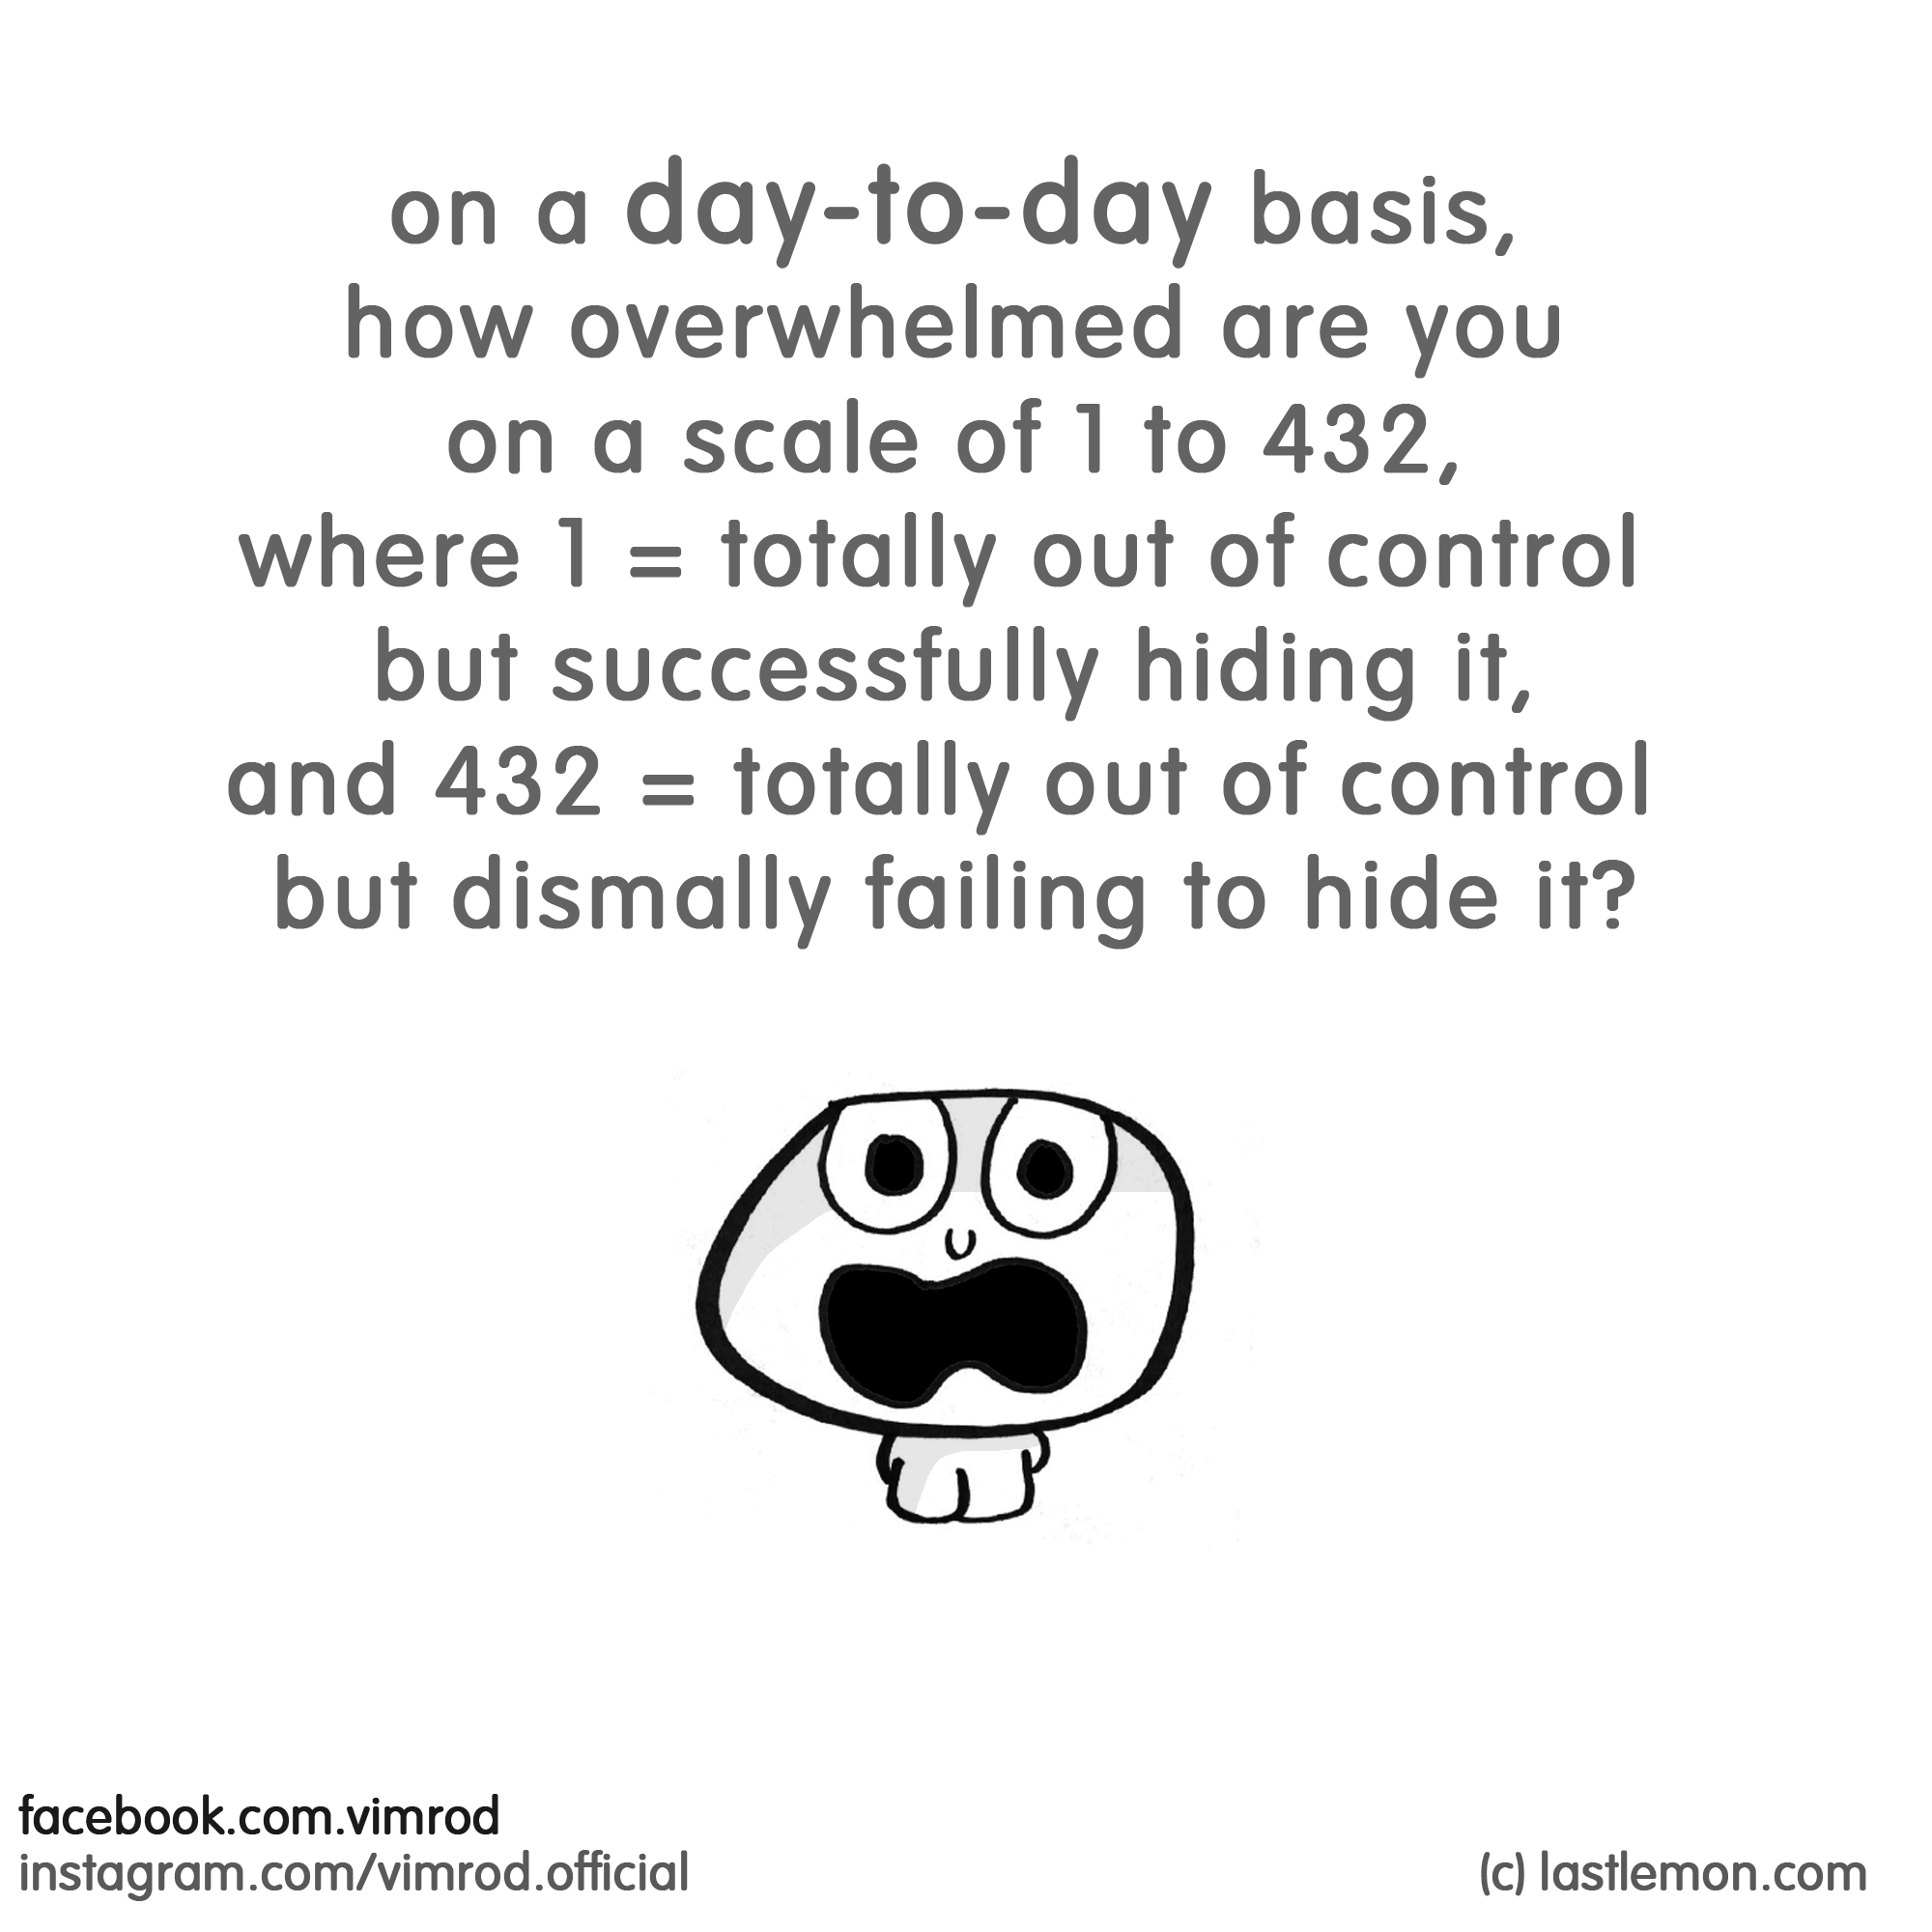 Vimrod: on a day-to-day basis, how overwhelmed are you on a scale of 1 to 432, where 1 = totally out of control but successfully hiding it, and 432 = totally out of control but dismally failing to hide it?